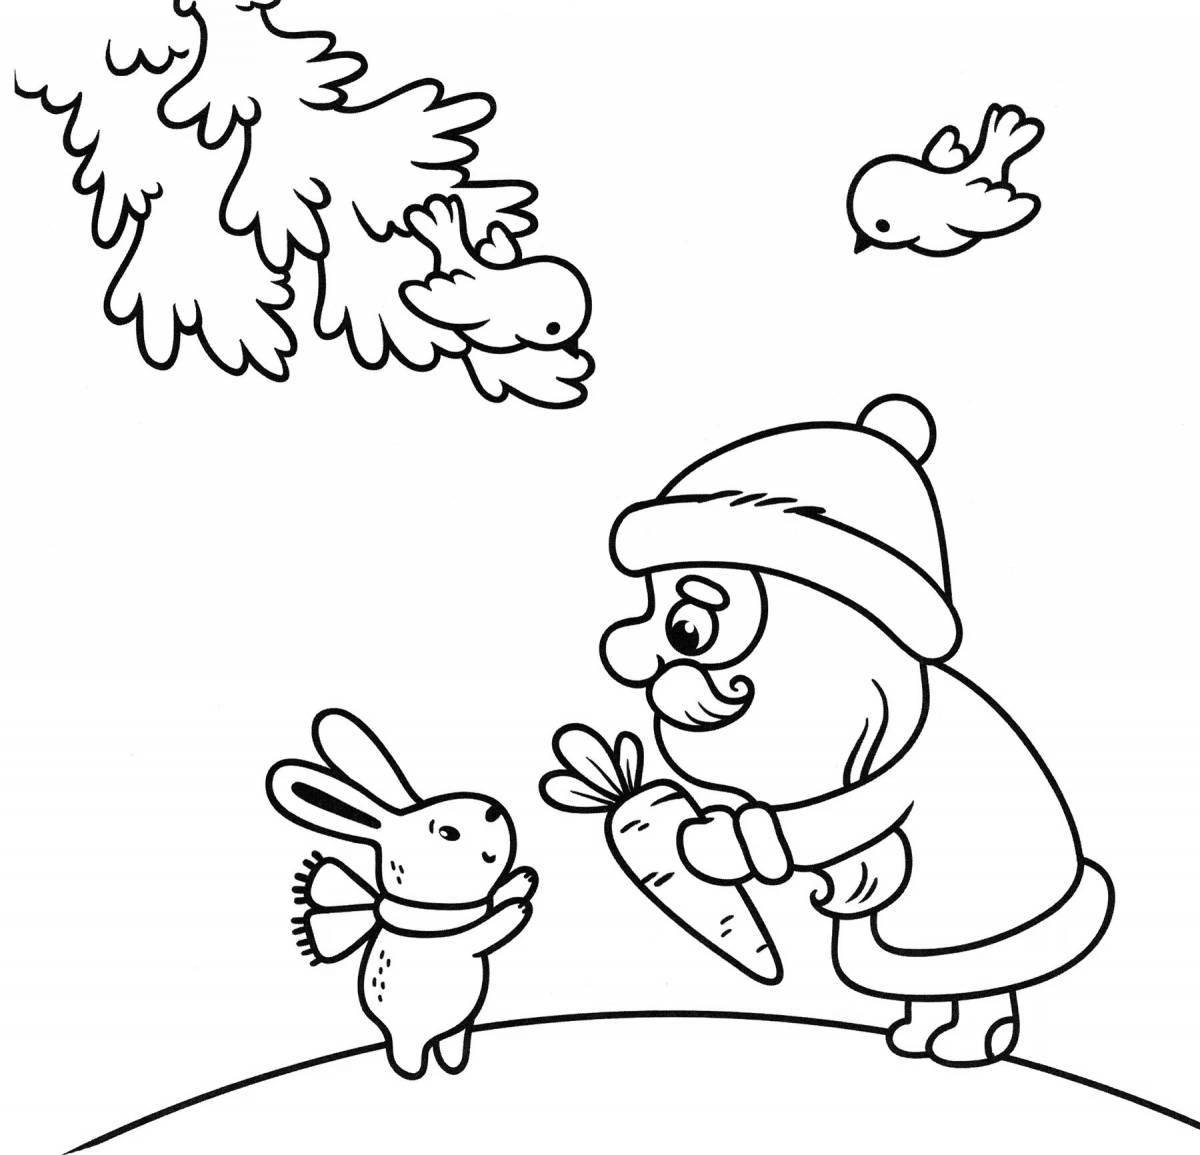 Coloring page joyful hare and tree